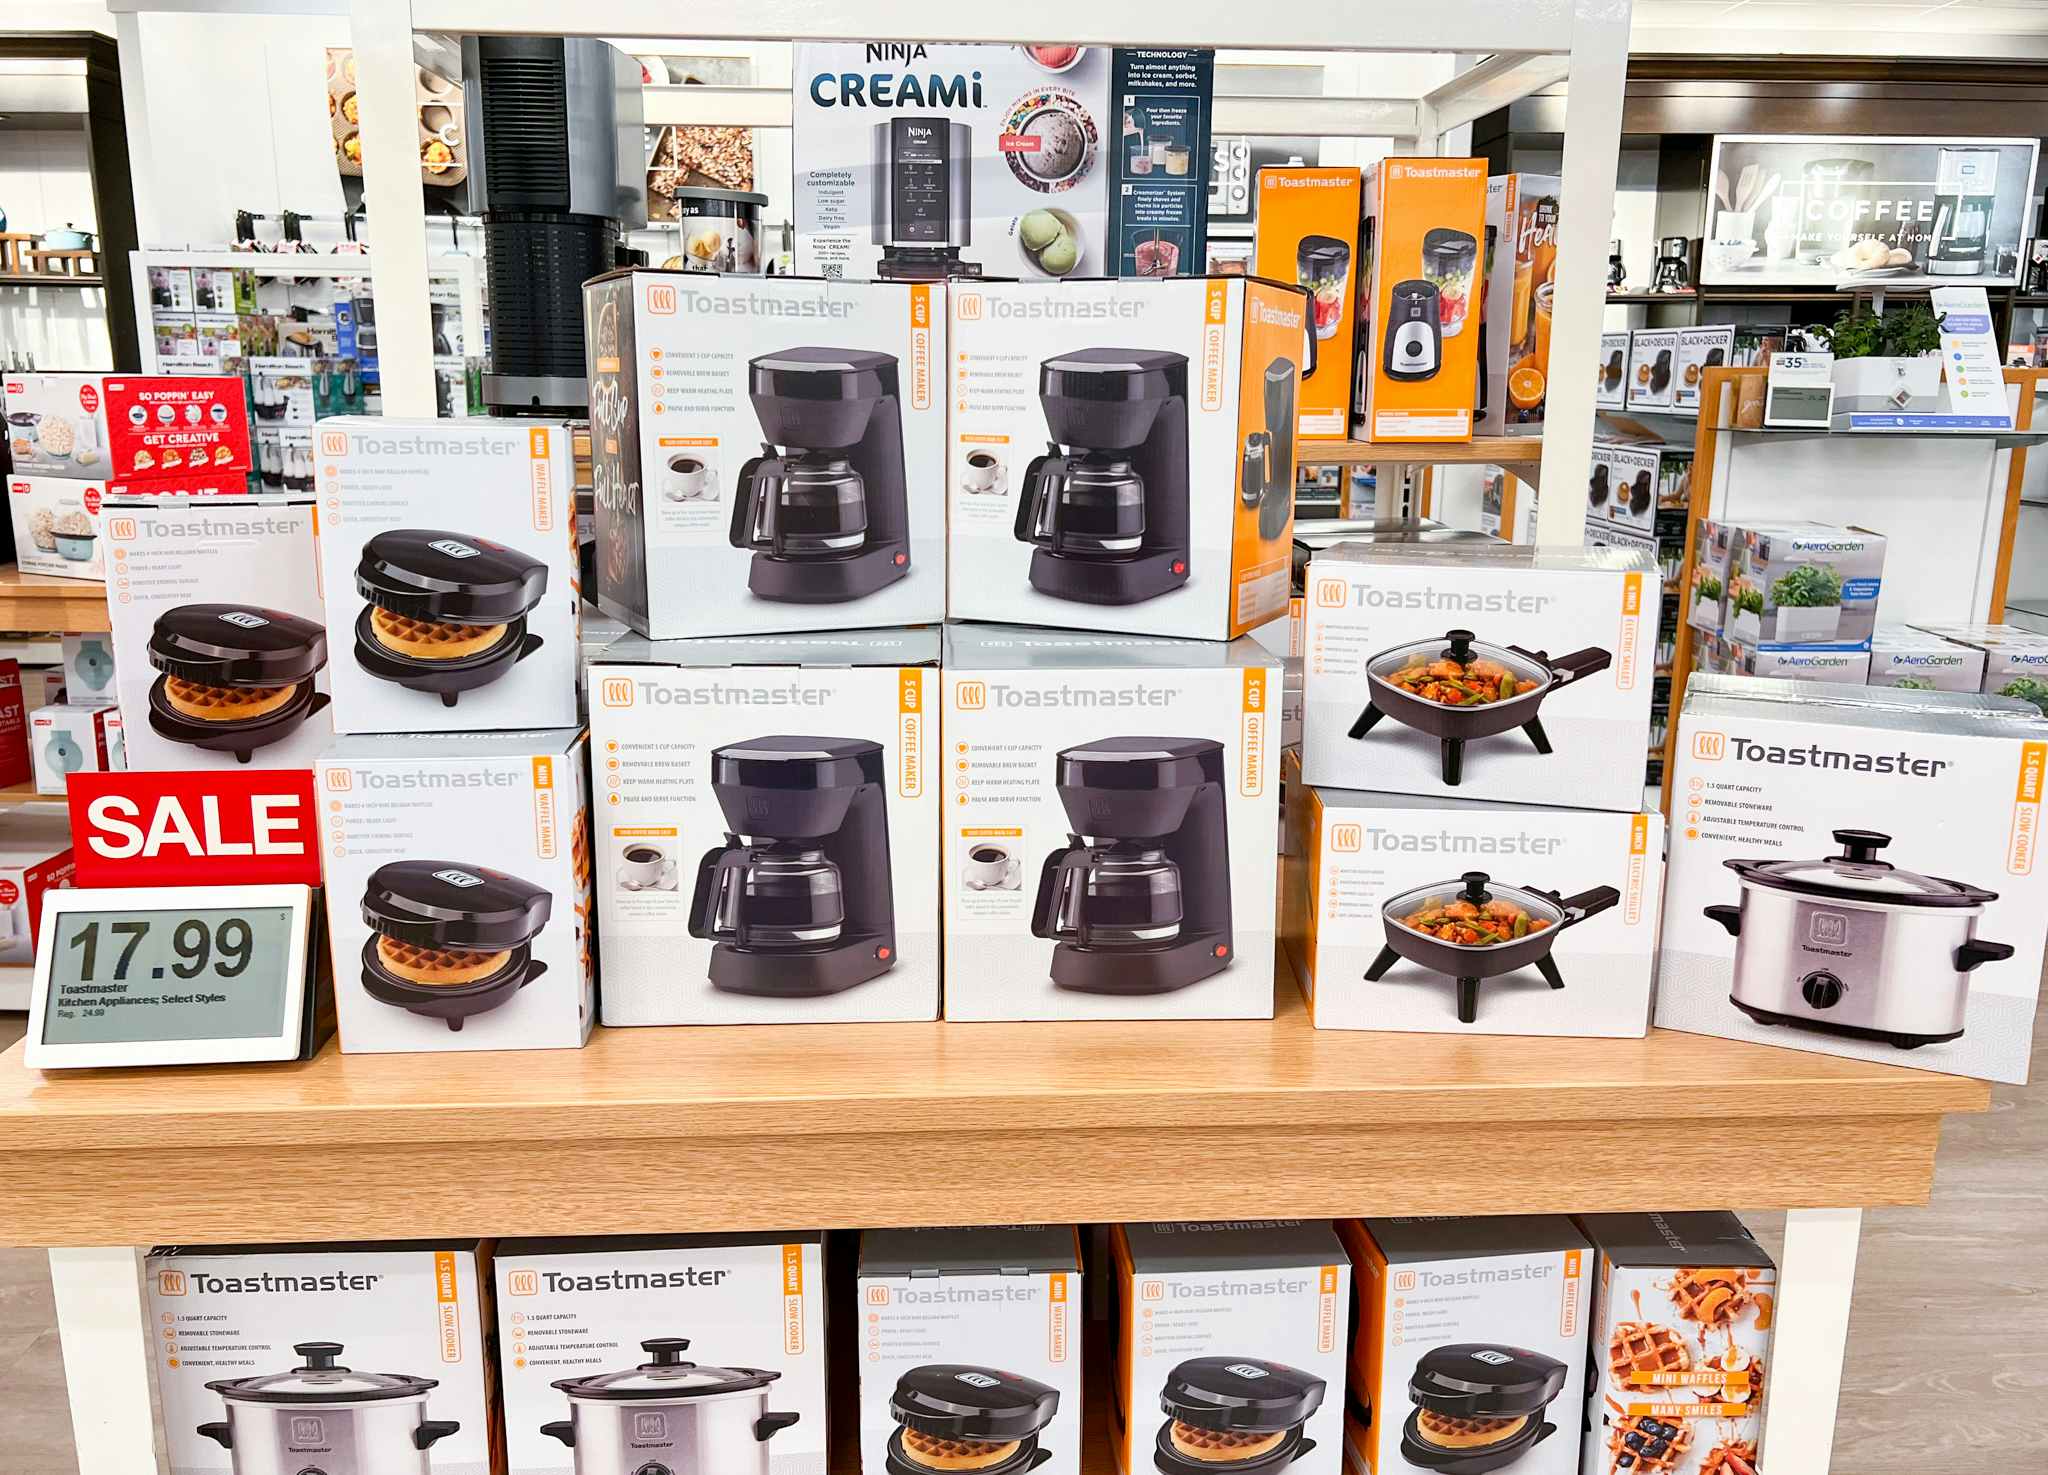 Small Kitchen Appliances on Sale at Kohl's! Check this out!